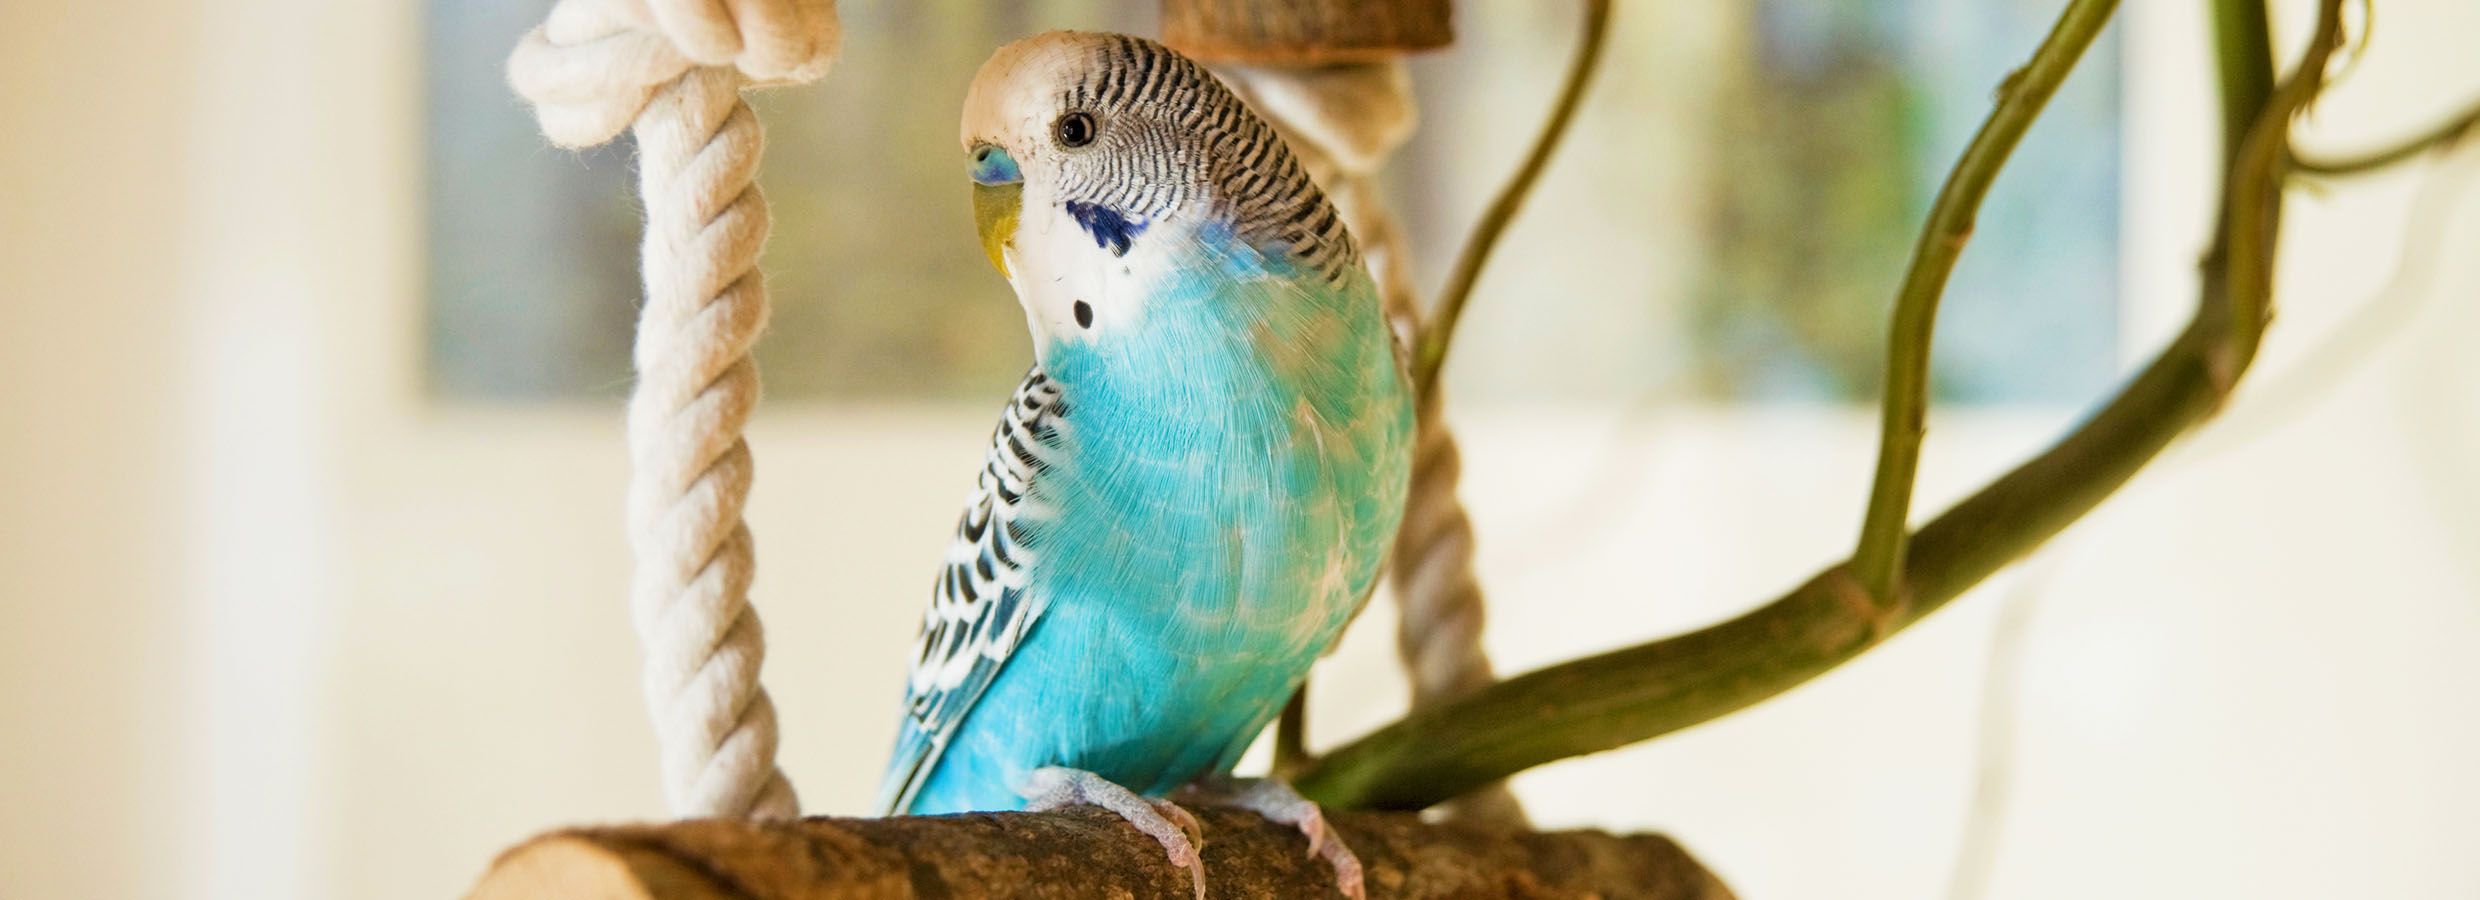 Safe Wood for Perches, Perches for Cages, Parakeets, Guide